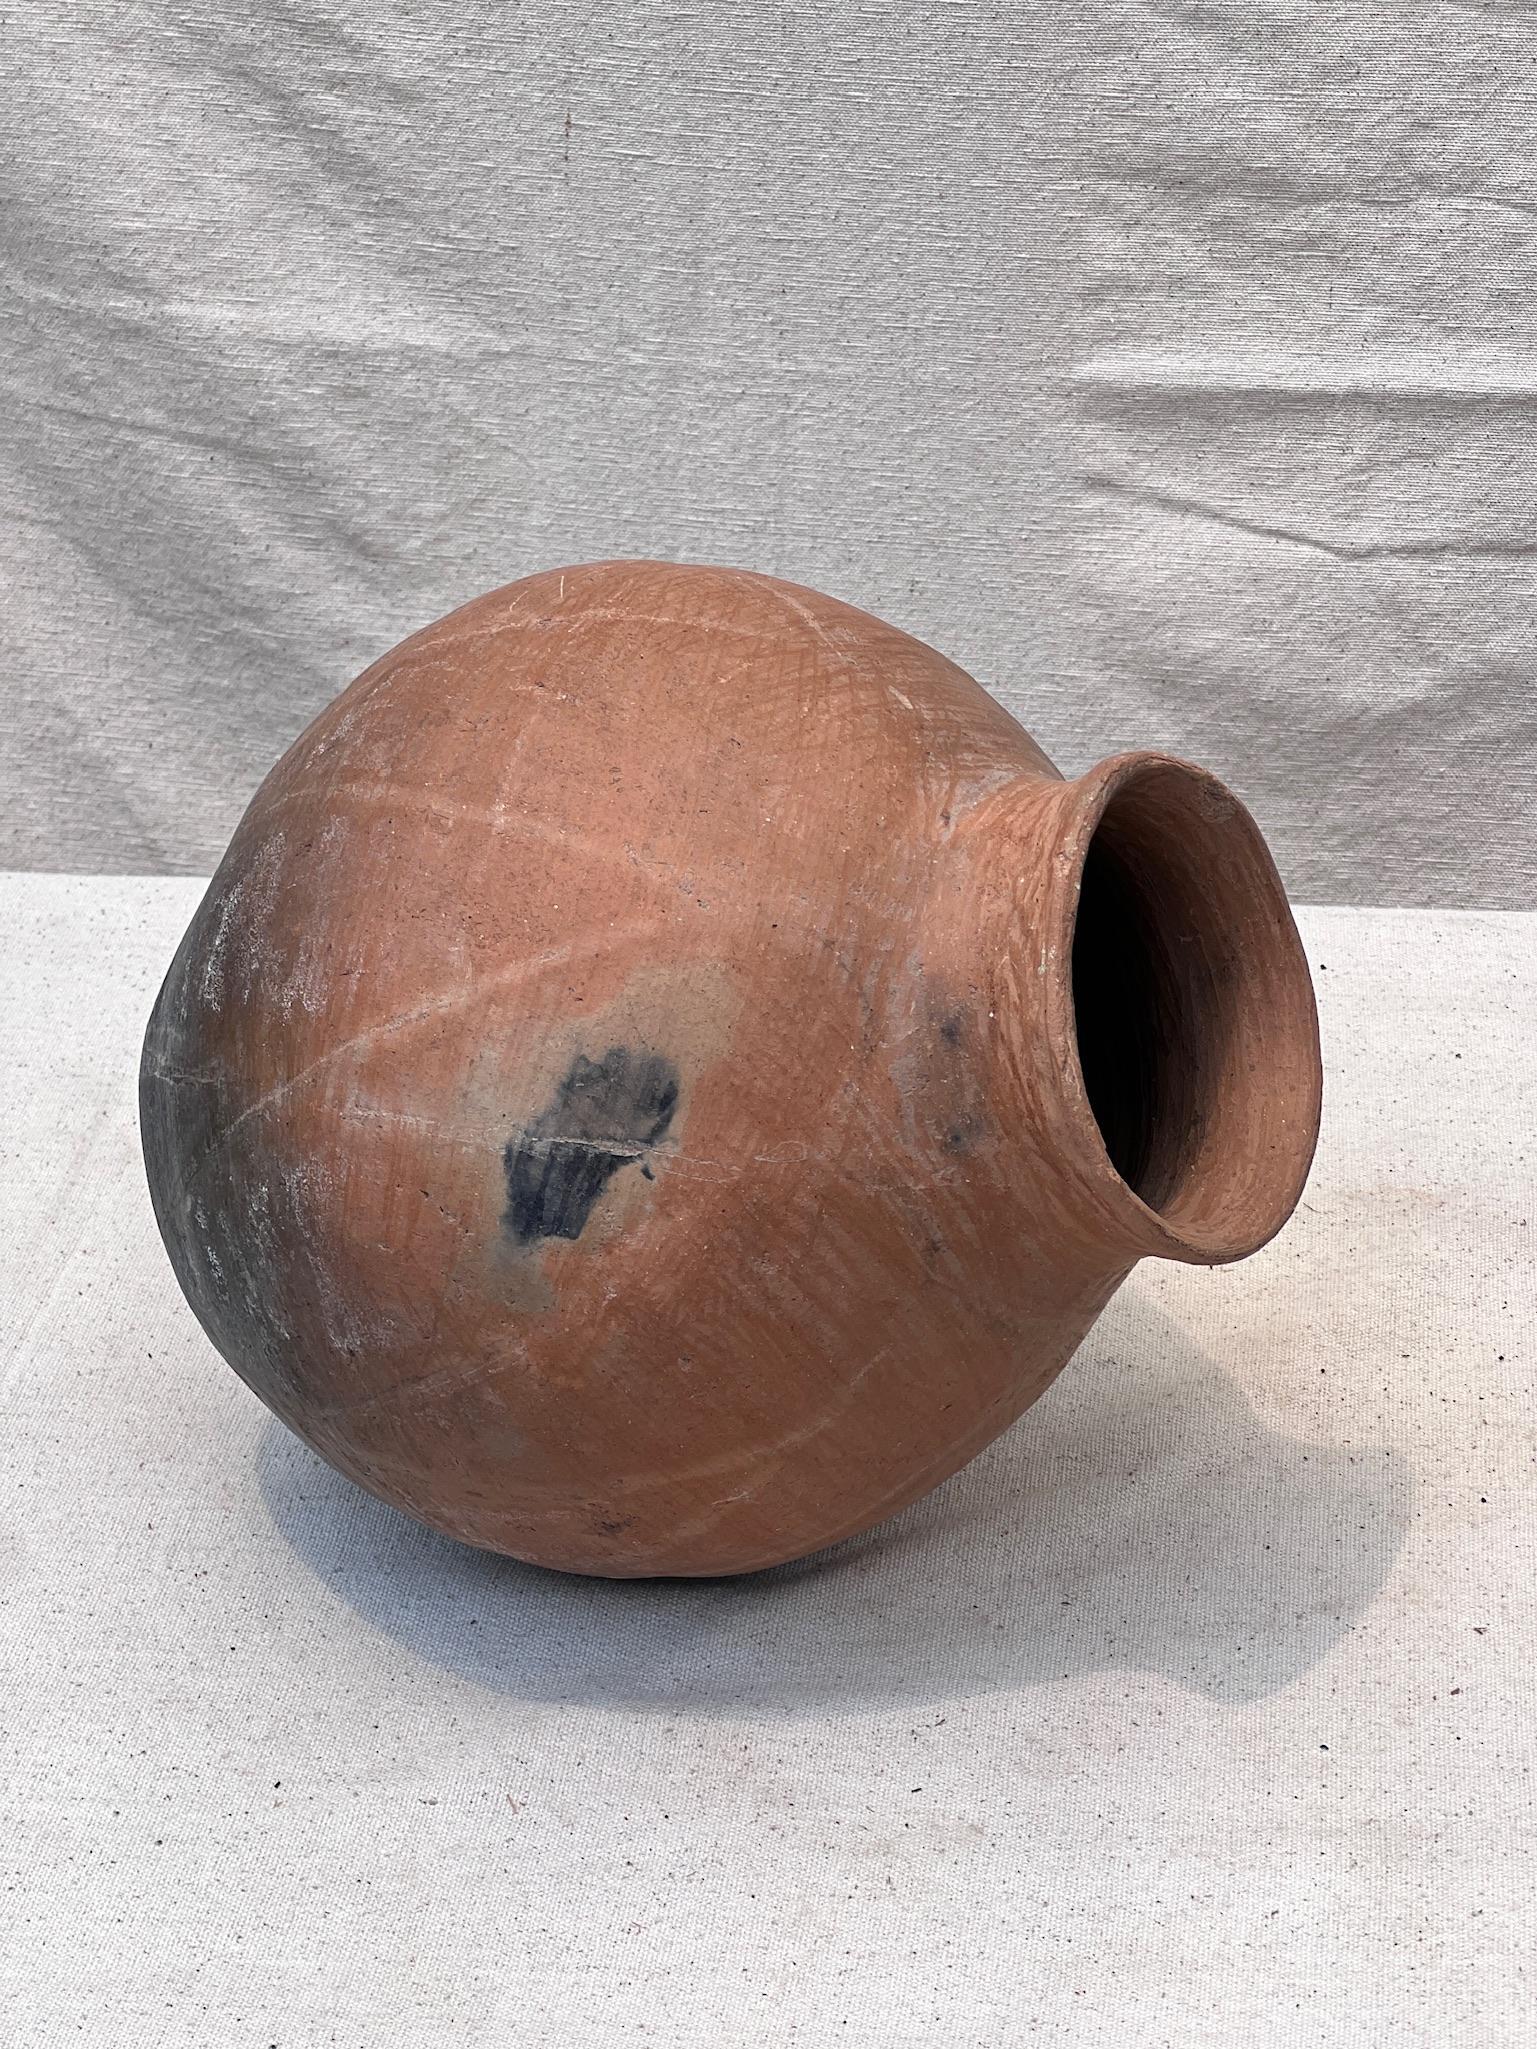 Tarahumara Indigenous craftsmanship: Handcrafted clay Tarahumara pottery, blending tradition and function. 

The Tarahumara people have a rich Native American pottery tradition that is both utilitarian and often characterized by a primitive